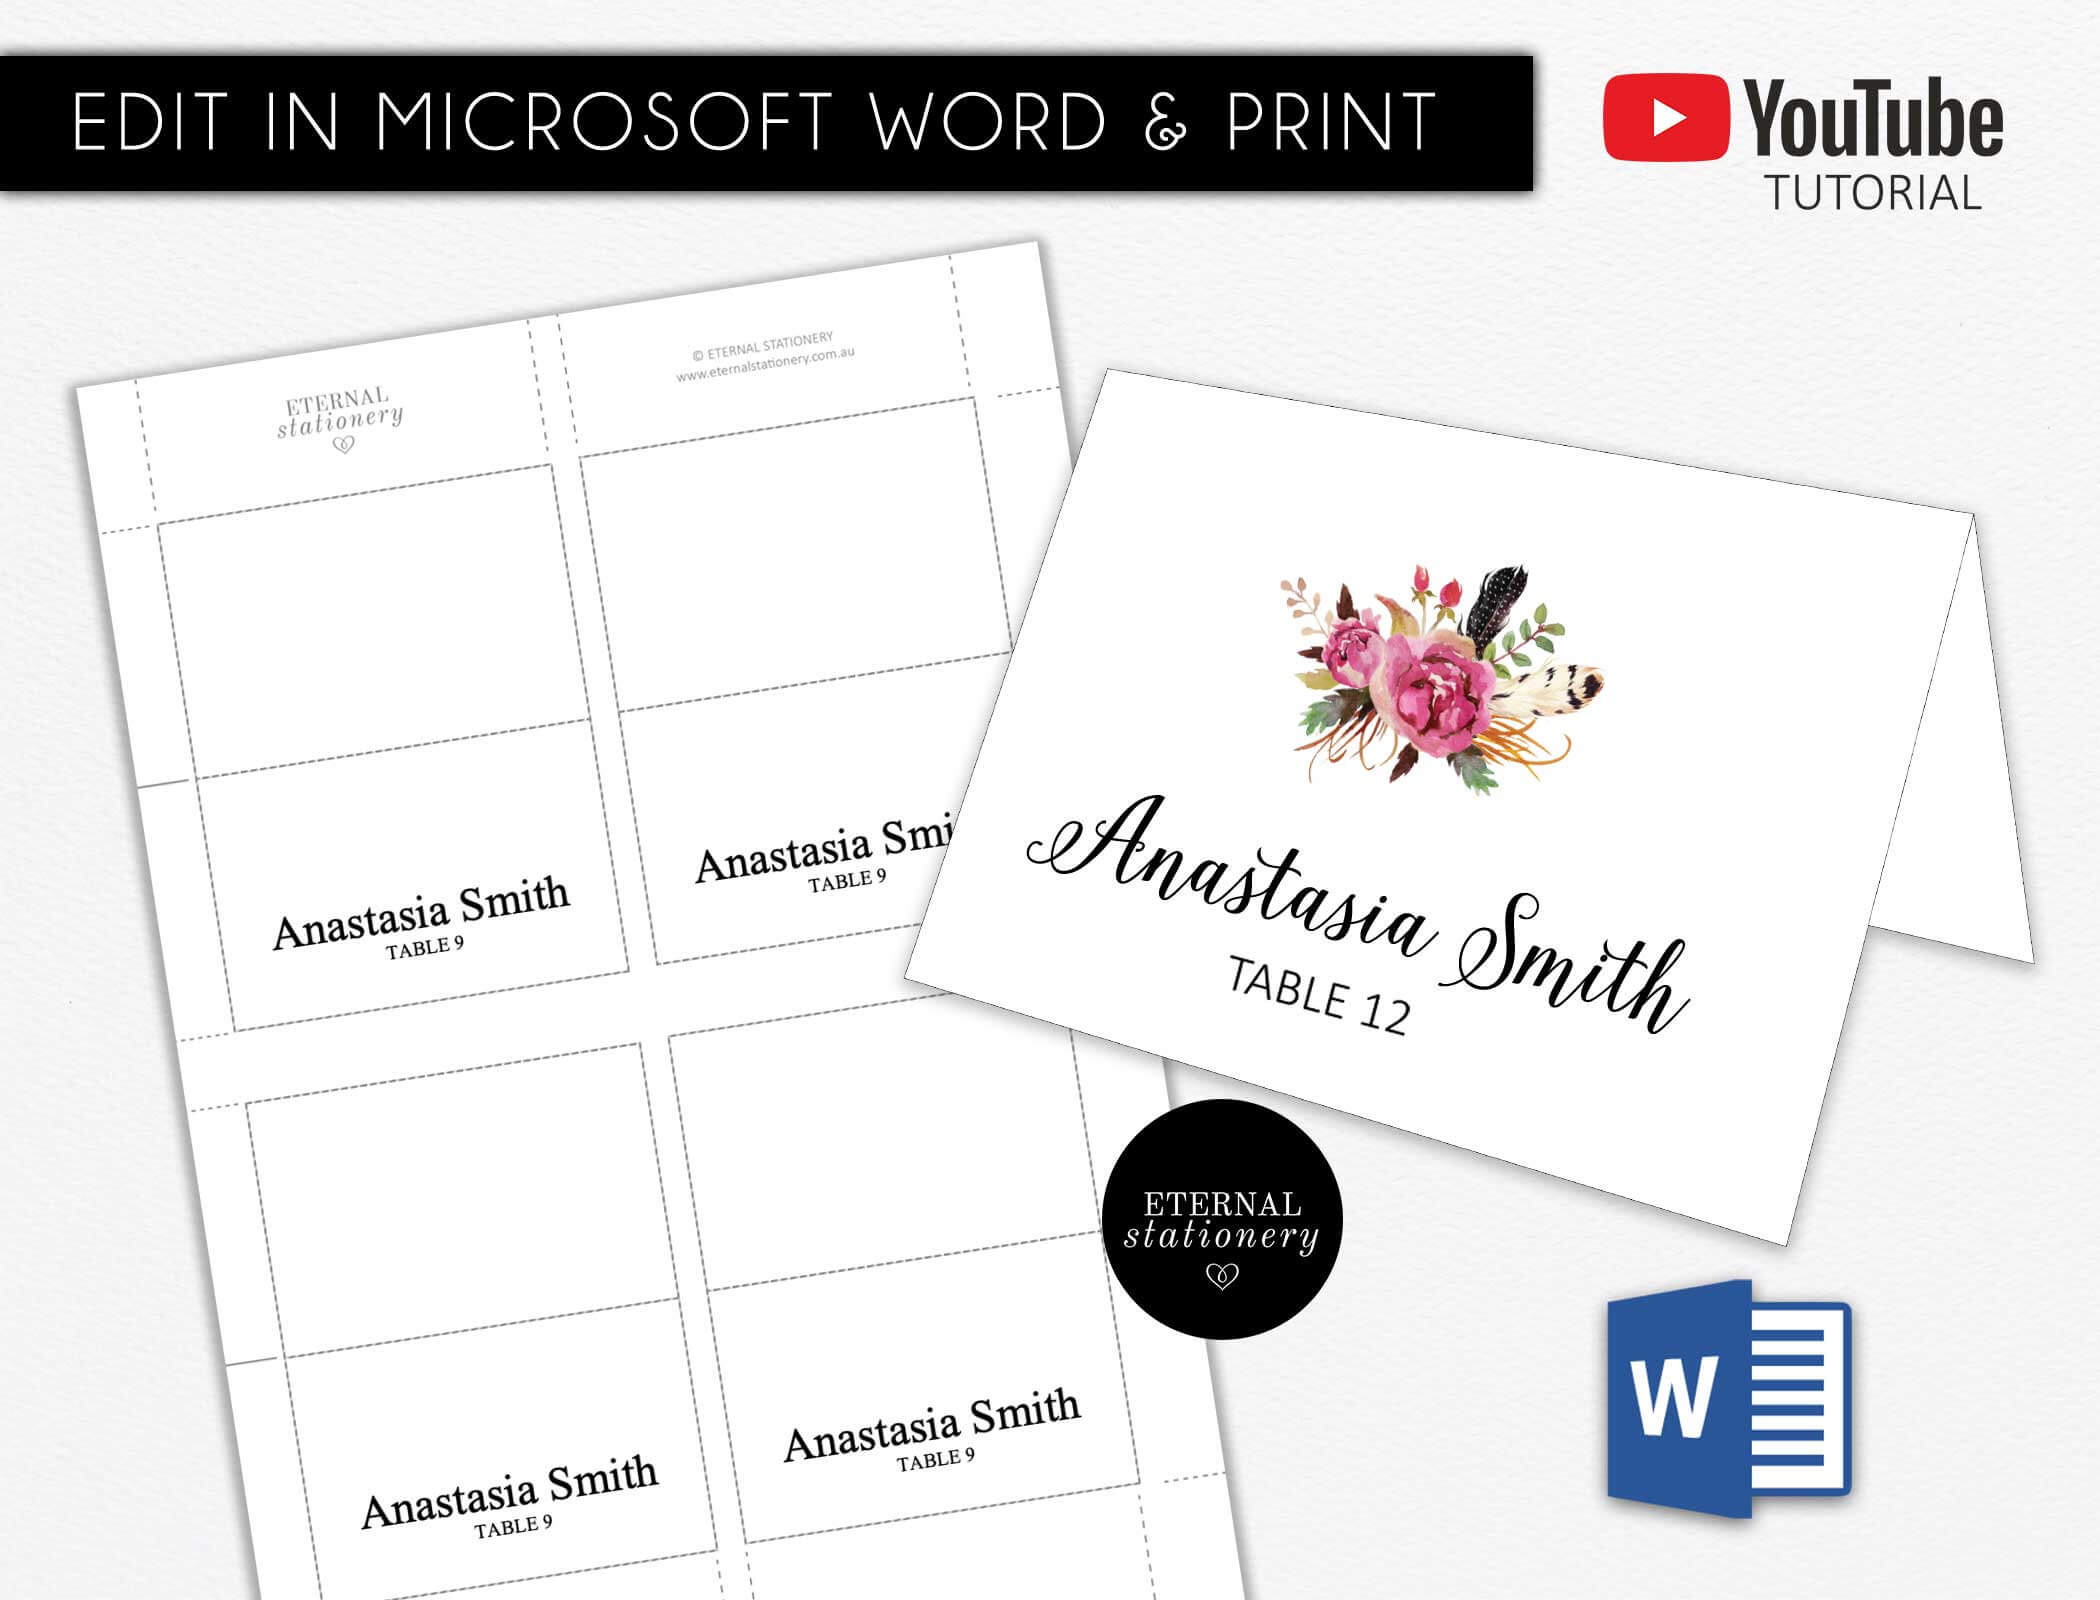 Diy Editable Microsoft Word Place Card Template, Wedding Place Card, Tent  Card, Engagement, Corporate Place Card, Escort Card, Pc 01 With Microsoft Word Place Card Template